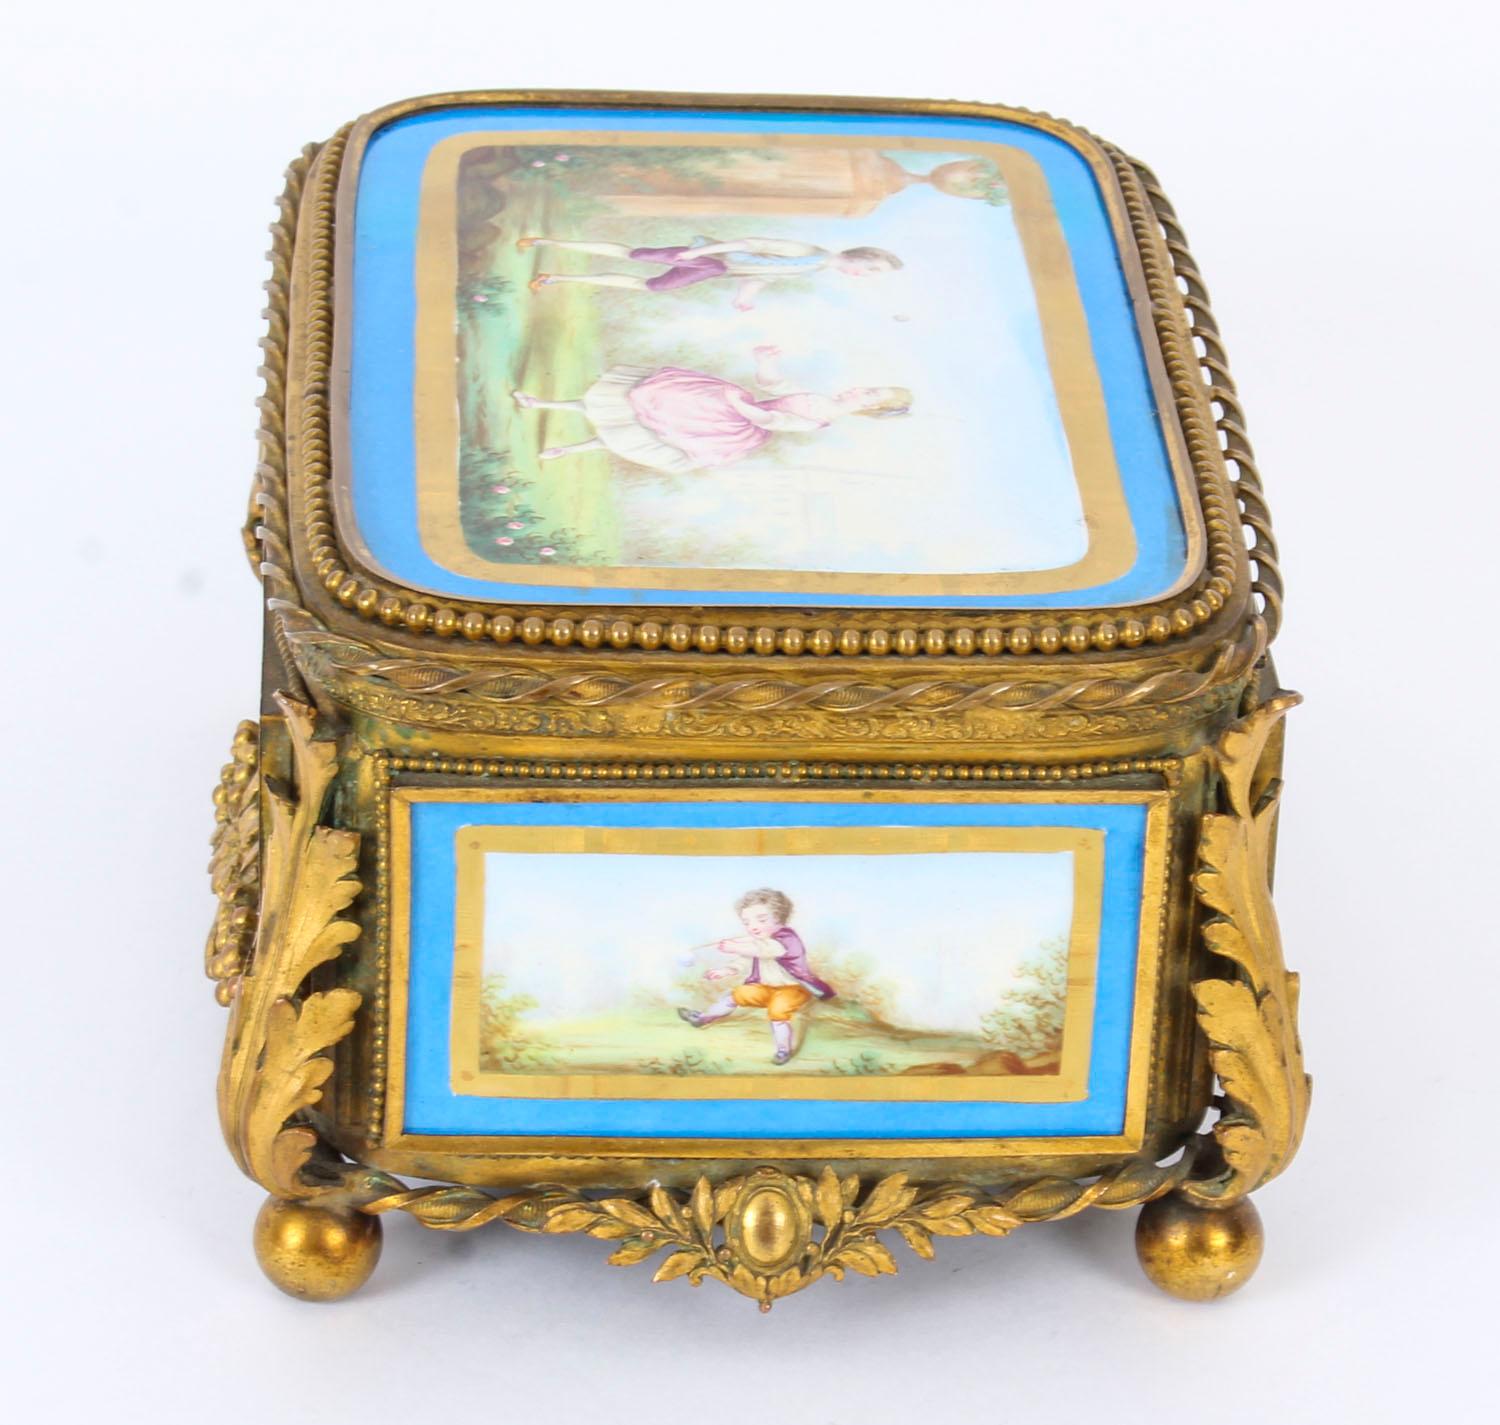 Antique French Sevres Porcelain and Ormolu Jewellery Casket 19th Century  For Sale 3